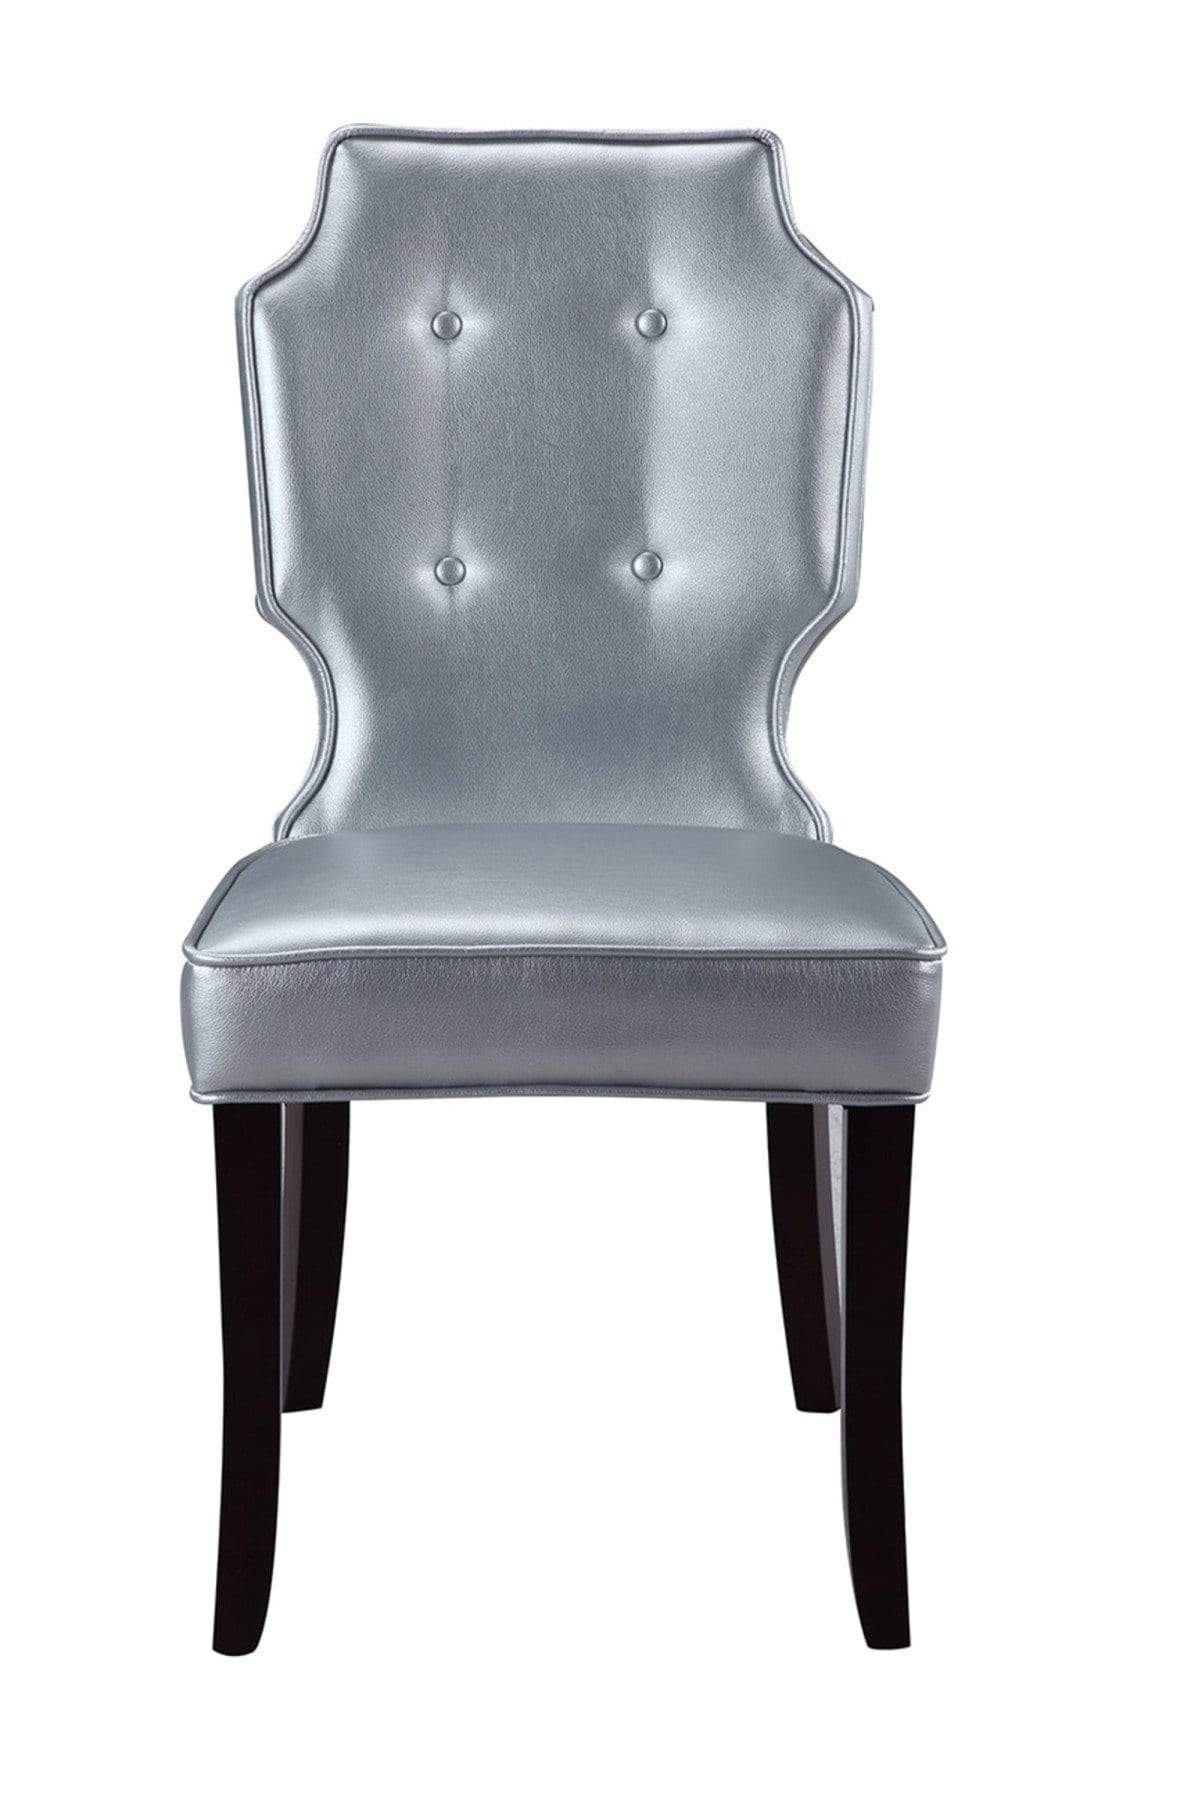 Iconic Home Lennon Faux Leather Tufted Dining Chair Set of 2 